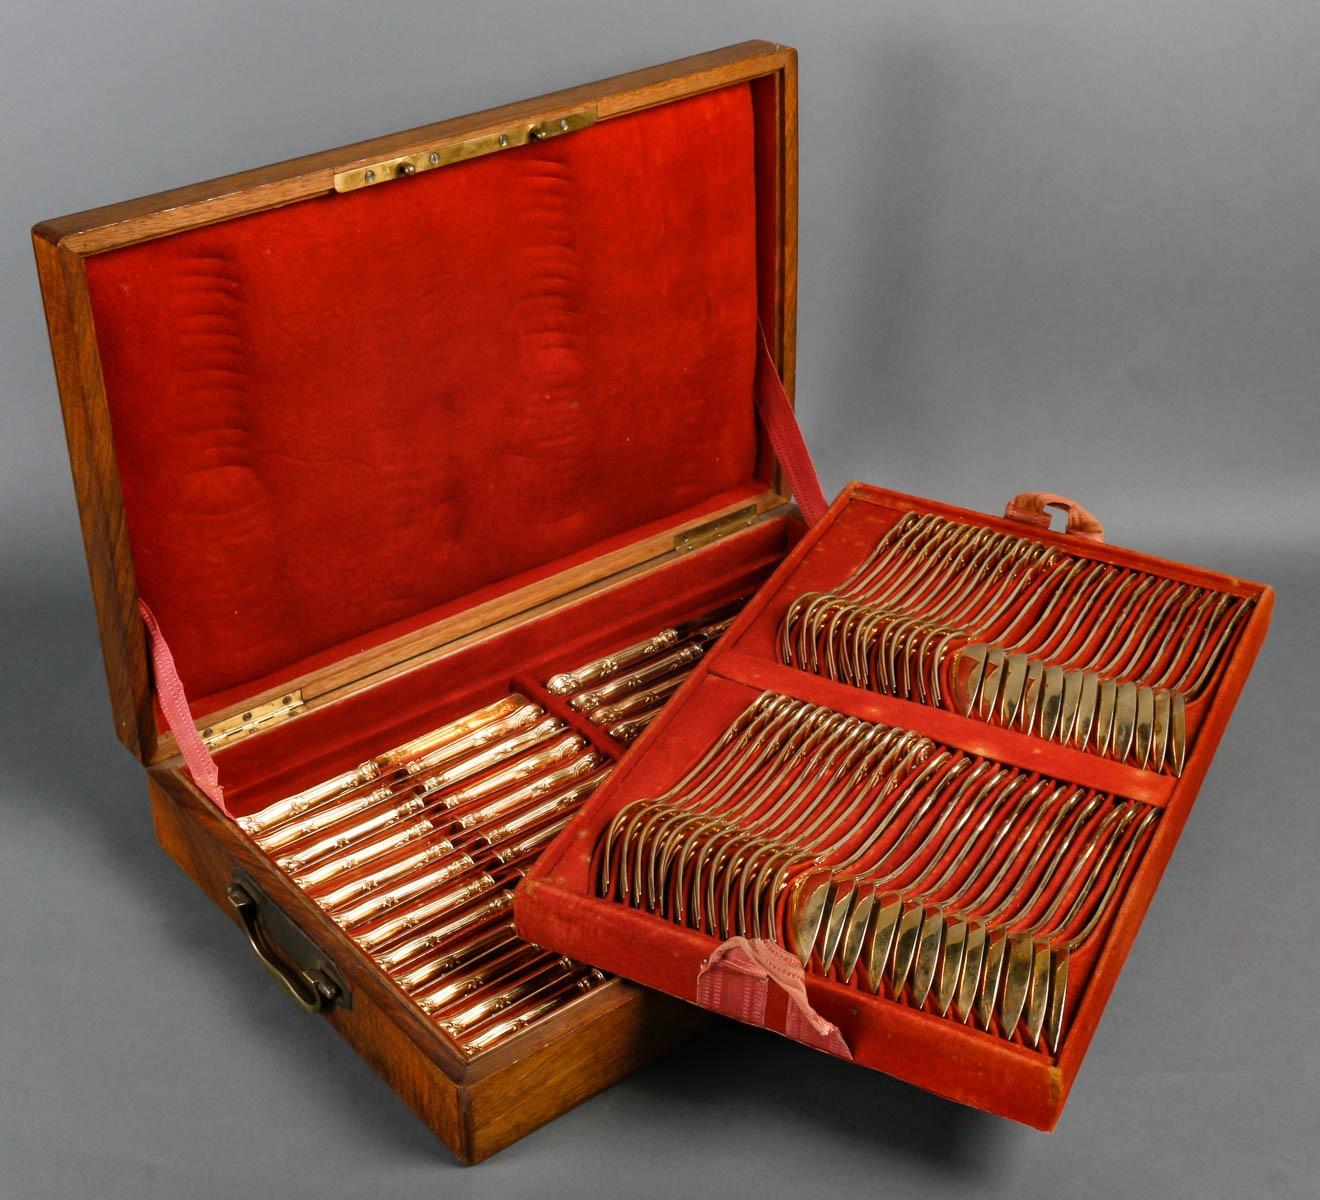 A 19th Century Silver Gilt Dessert and Cheese Service by Odiot Orfèvre du Roy Paris

A 19th Century Silver Gilt 96 pieces Dessert and Cheese Service
Two trays composed of 24 spoons, 24 forks and 48 knives
Louis XV Style
Each stamped ODIOT with